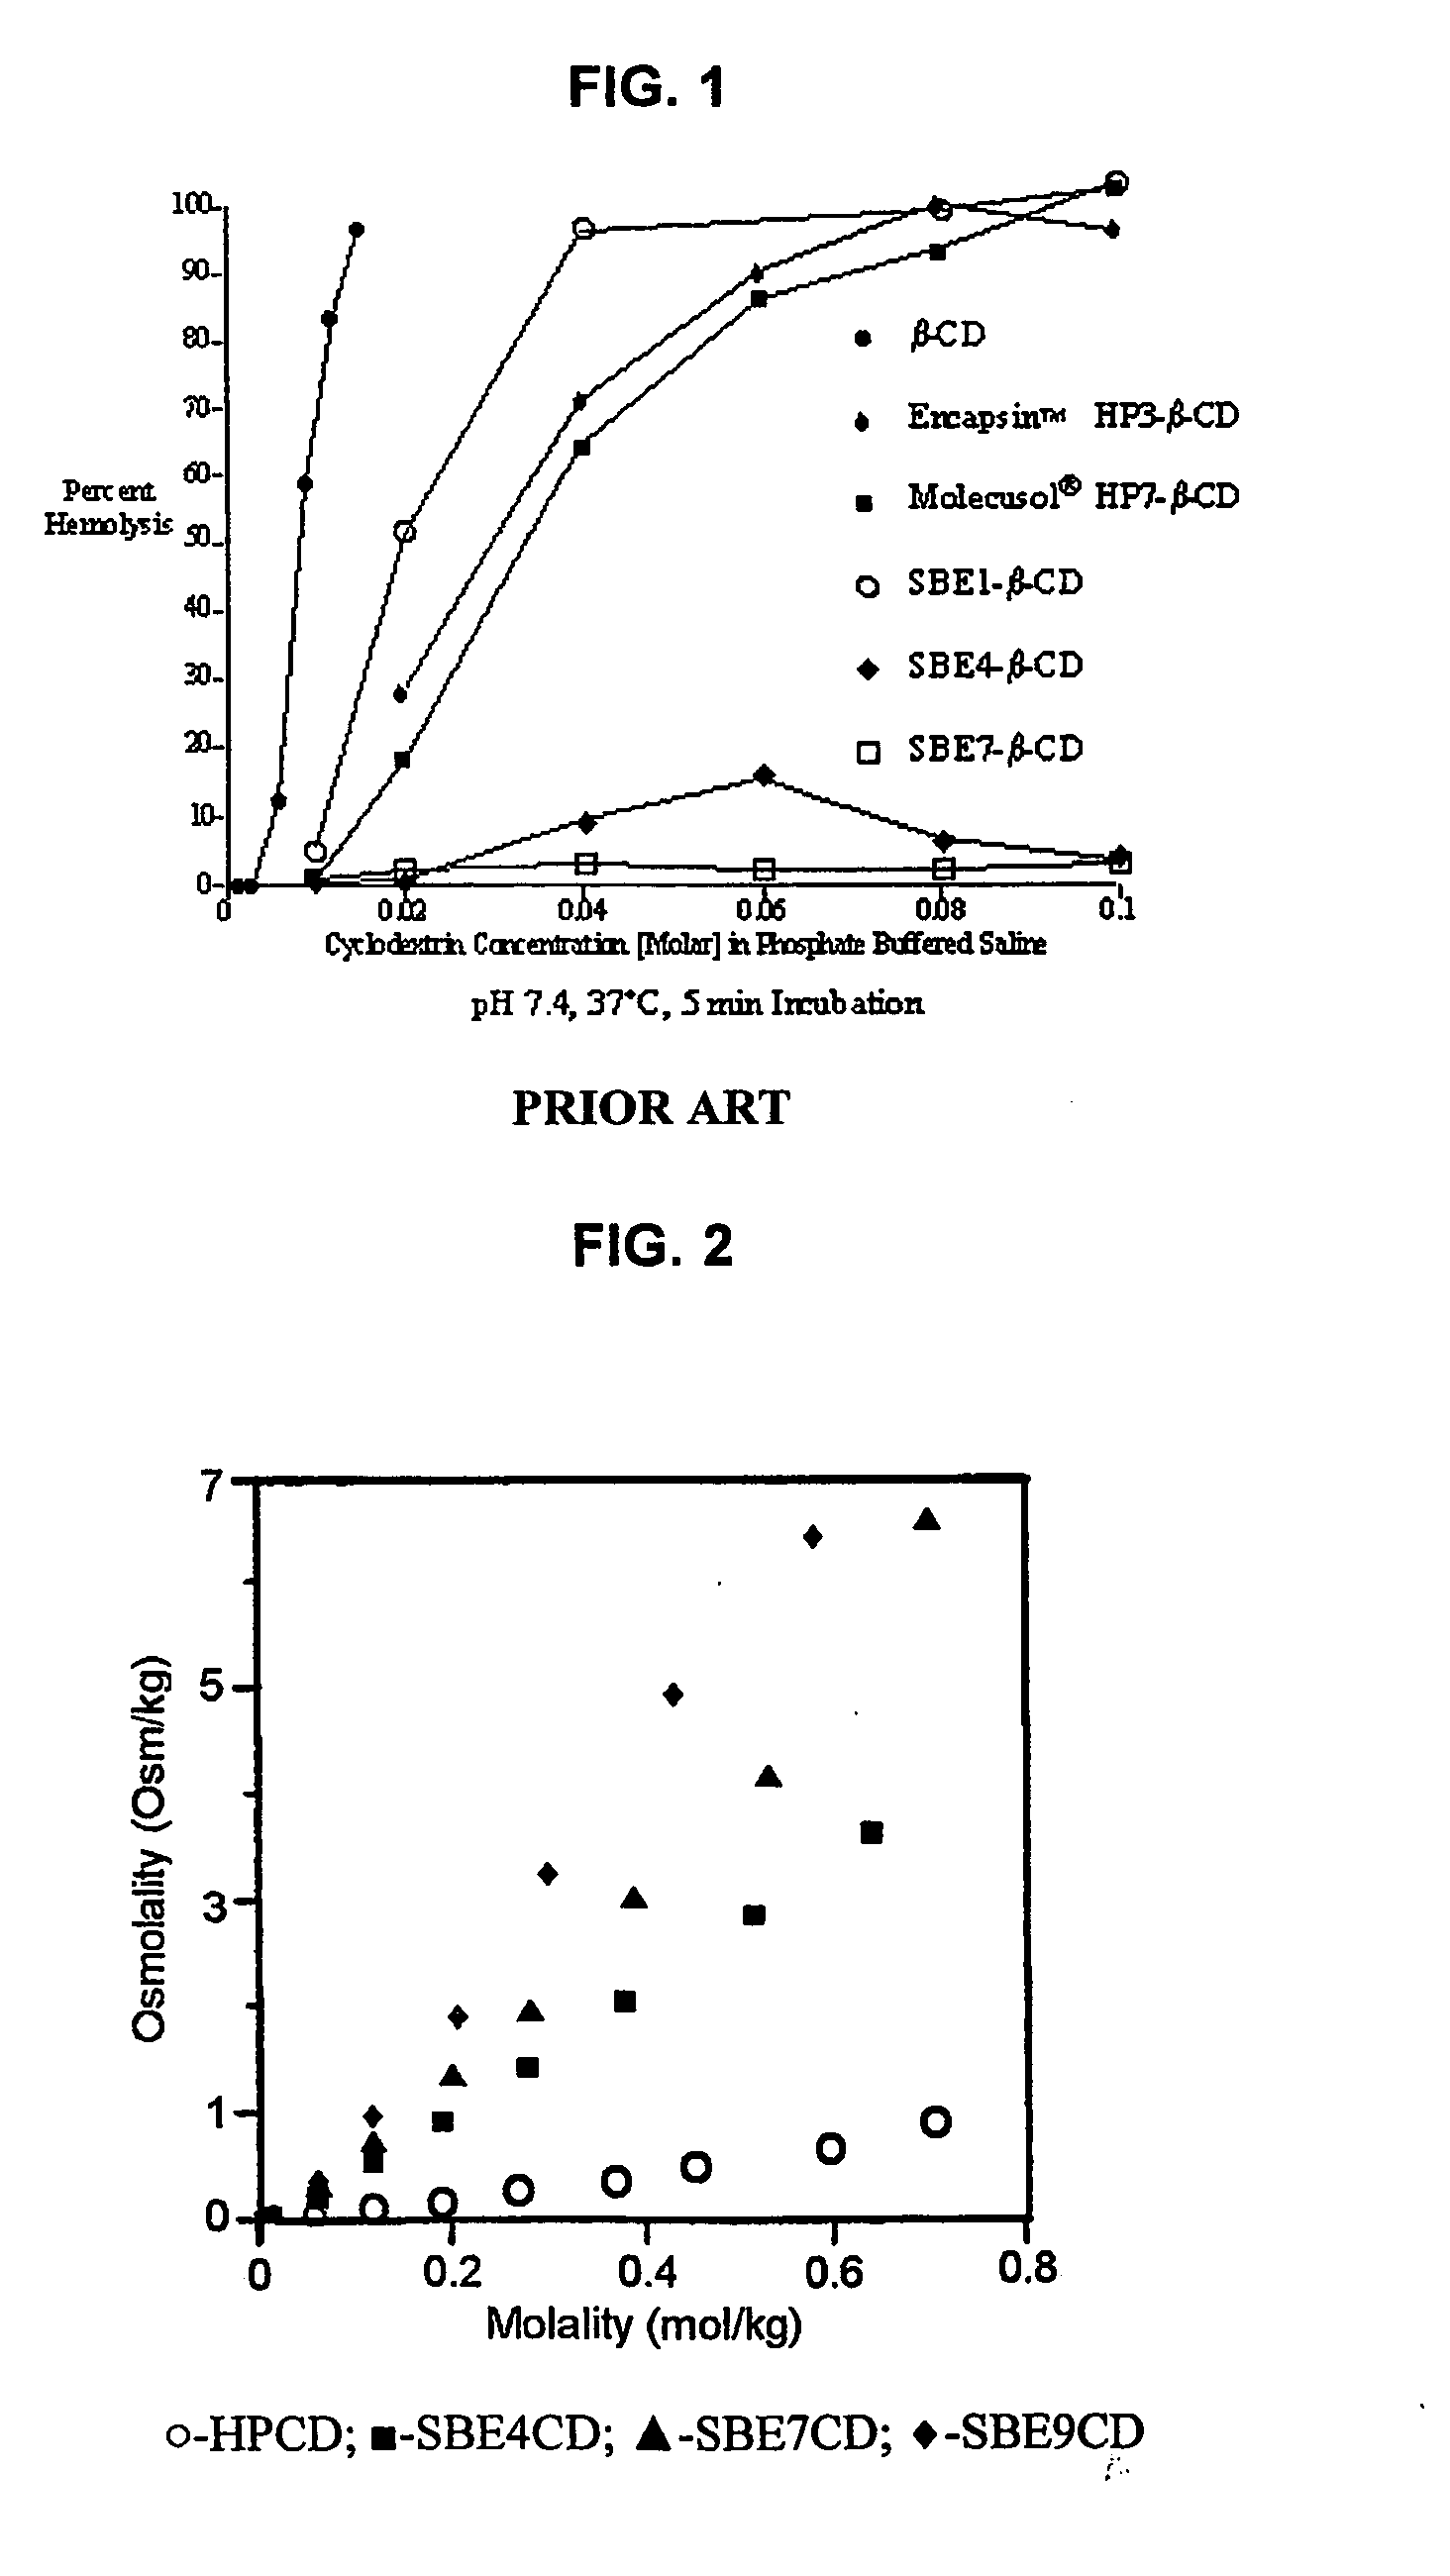 Use of sulfoalkyl ether cyclodextrin as a preservative